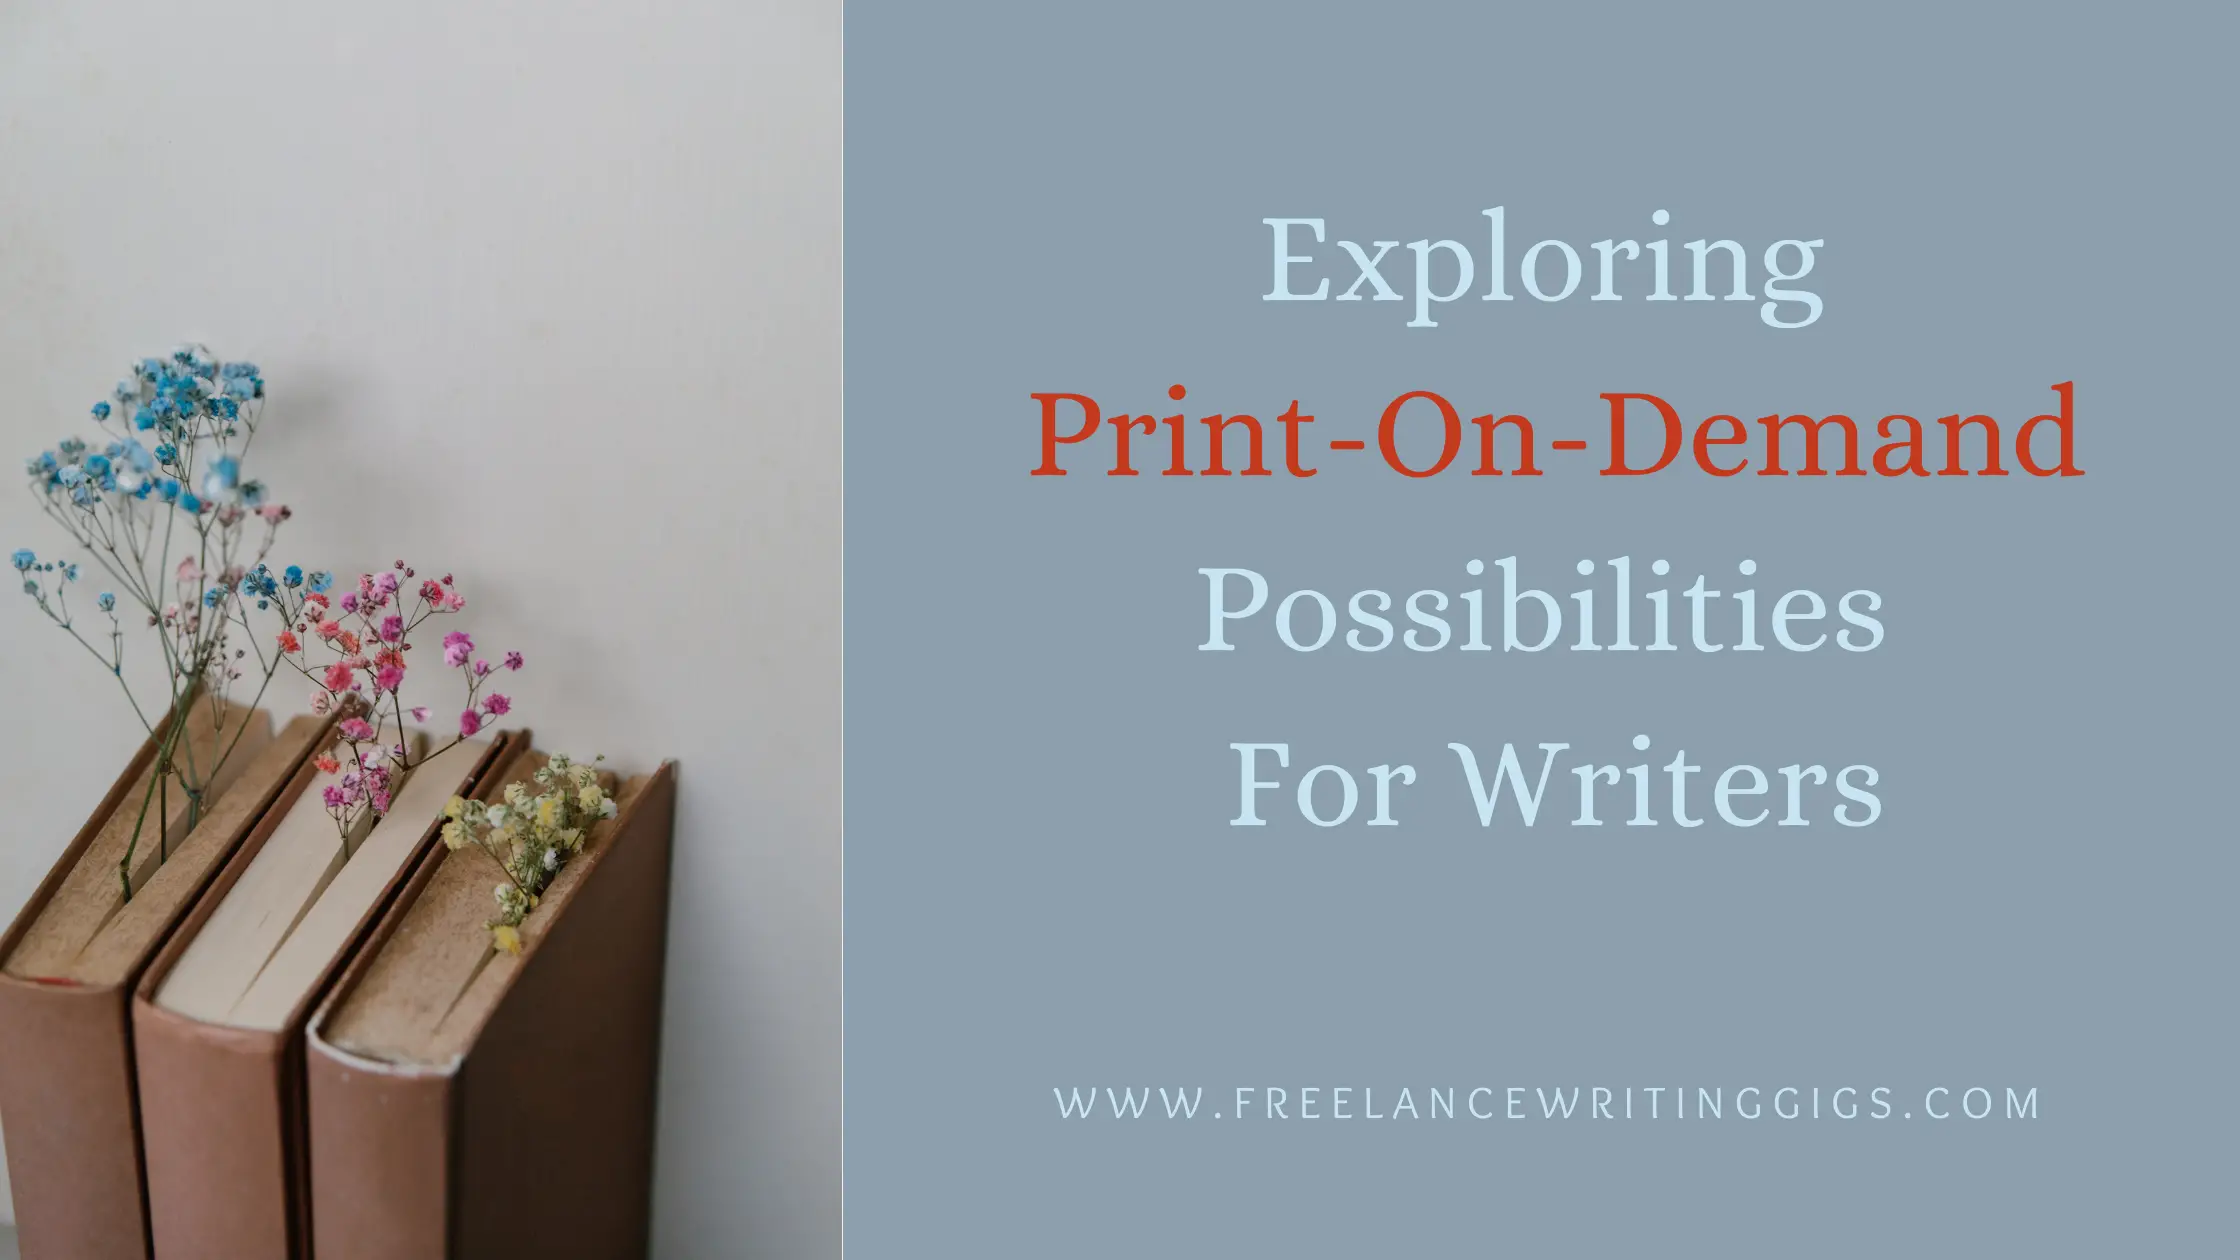 Journals and More: Exploring Print-On-Demand Possibilities For Writers